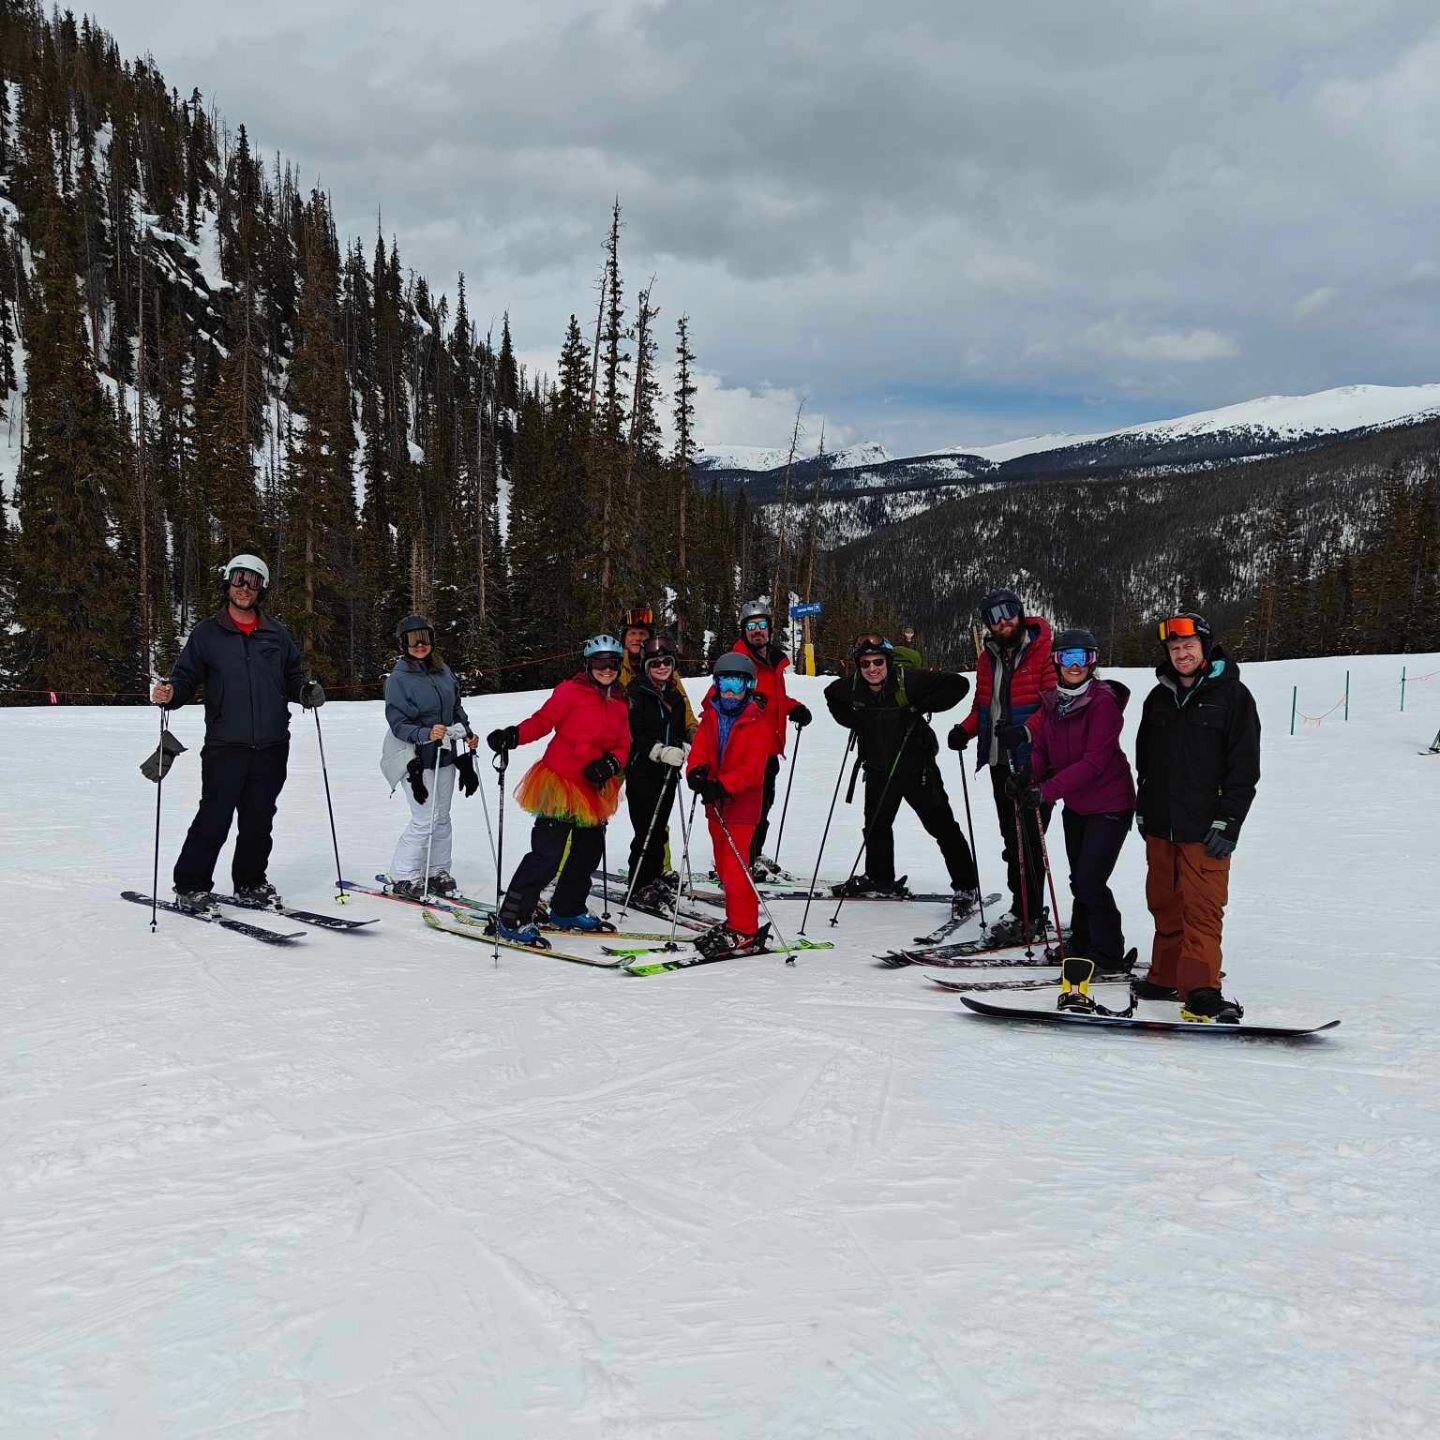 4 🇨🇭 8 friends = 12 total! 🏂🏼 ⛷️
Thank you to all those who came to Winter Park on Saturday for our Swiss Ski Day on the mountain! And a big thank you to SAFS 🇨🇭 Board Member Will Currat  for helping us out with discount tix. Hopp Schwiiz! 🇨🇭